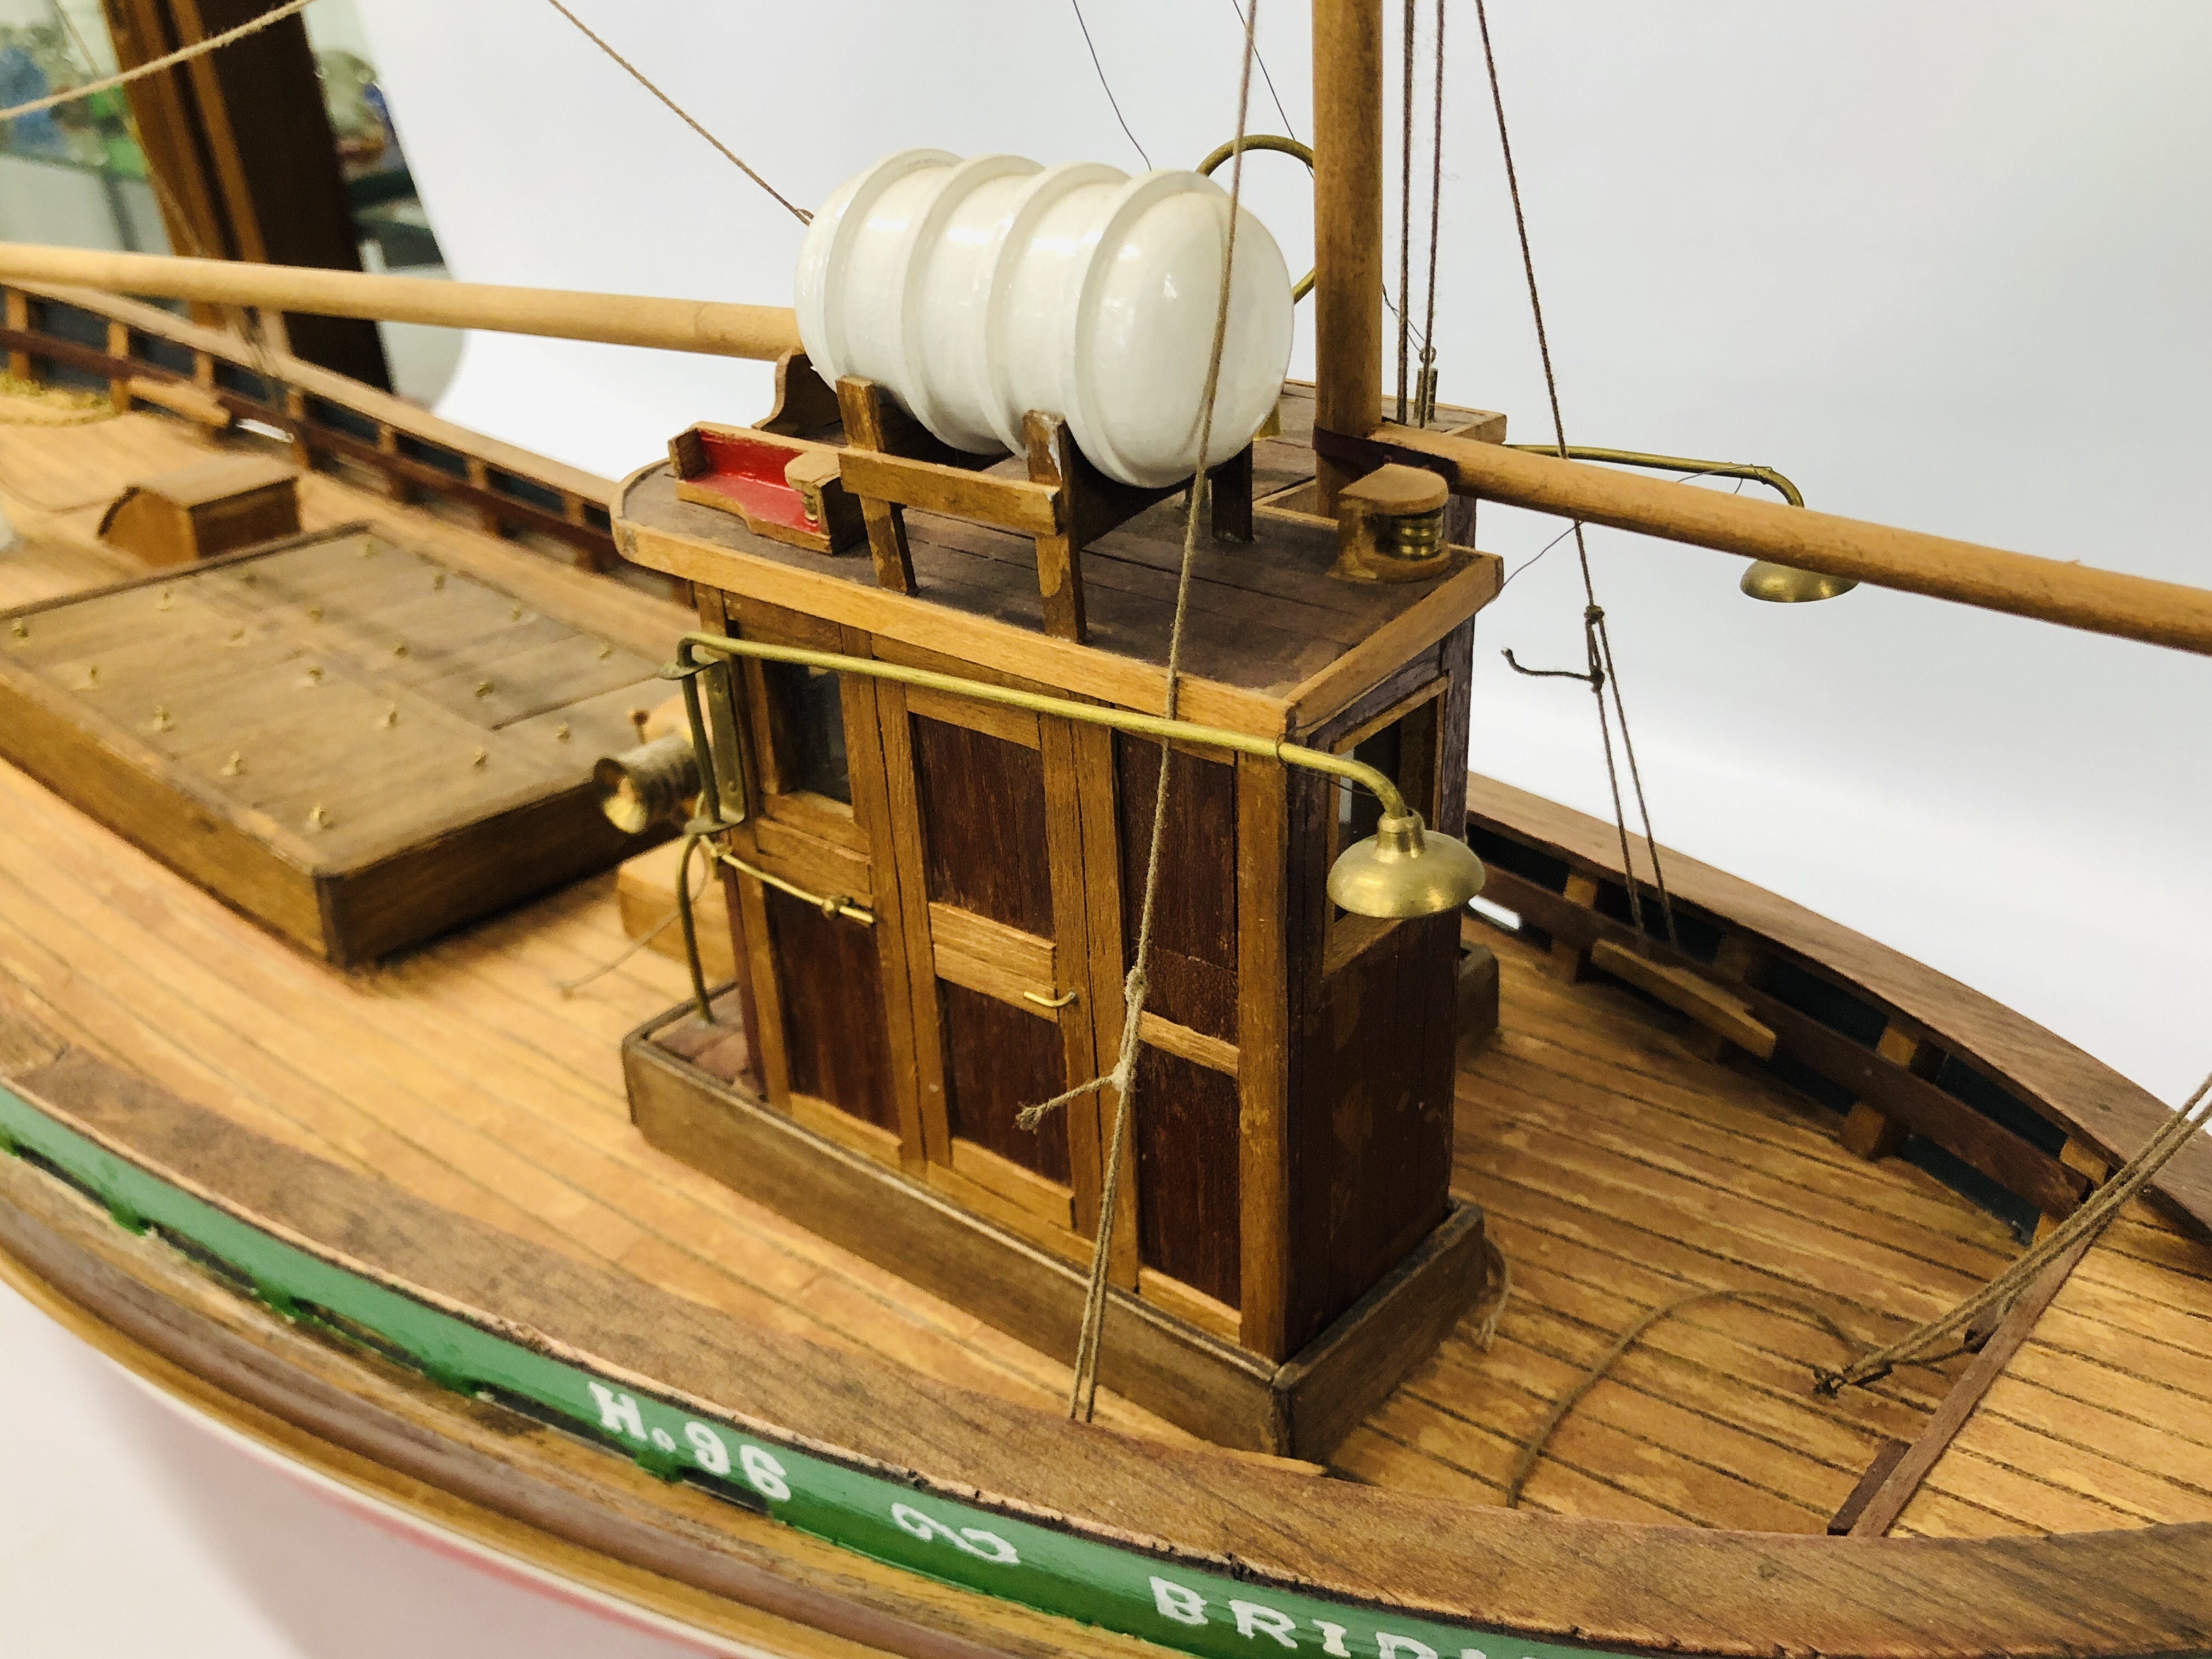 A VINTAGE HAND BUILT WOODEN MODEL OF A FISHING TRAWLER "EILEEN" NO. 96 LENGTH 85CM. HEIGHT 66CM. - Image 6 of 11